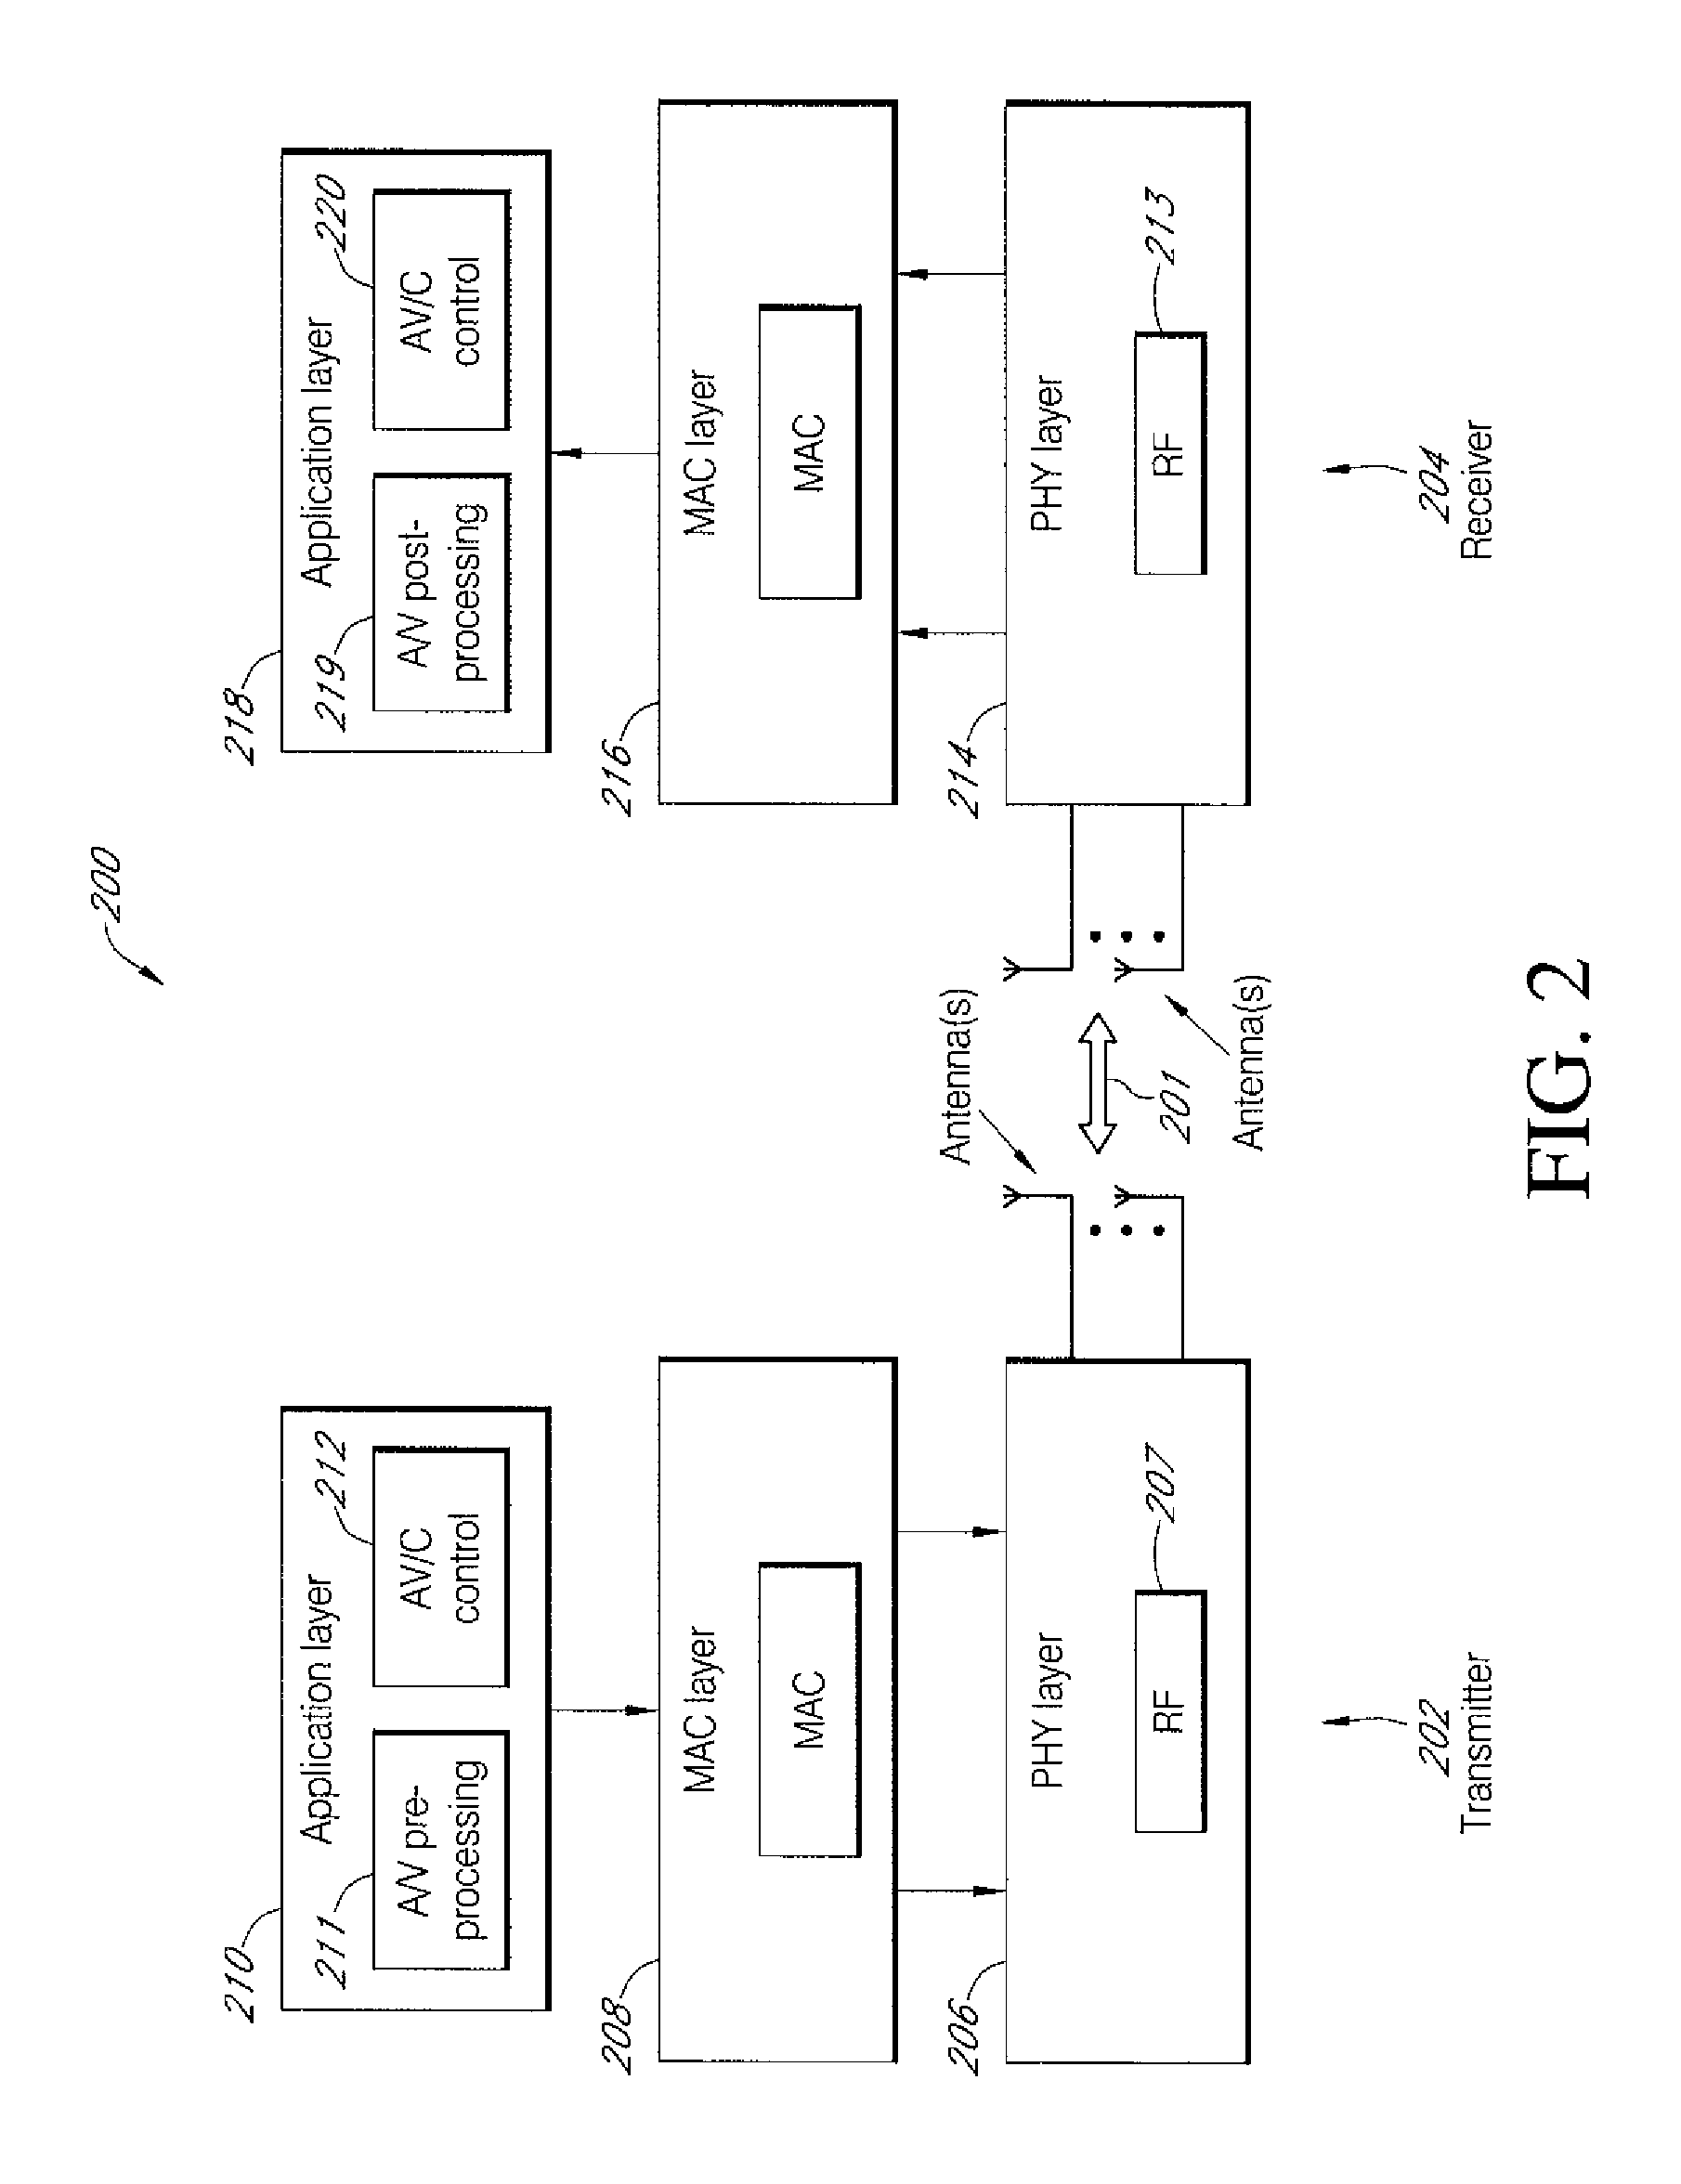 System and method for wireless communication network having proximity control based on authorization token